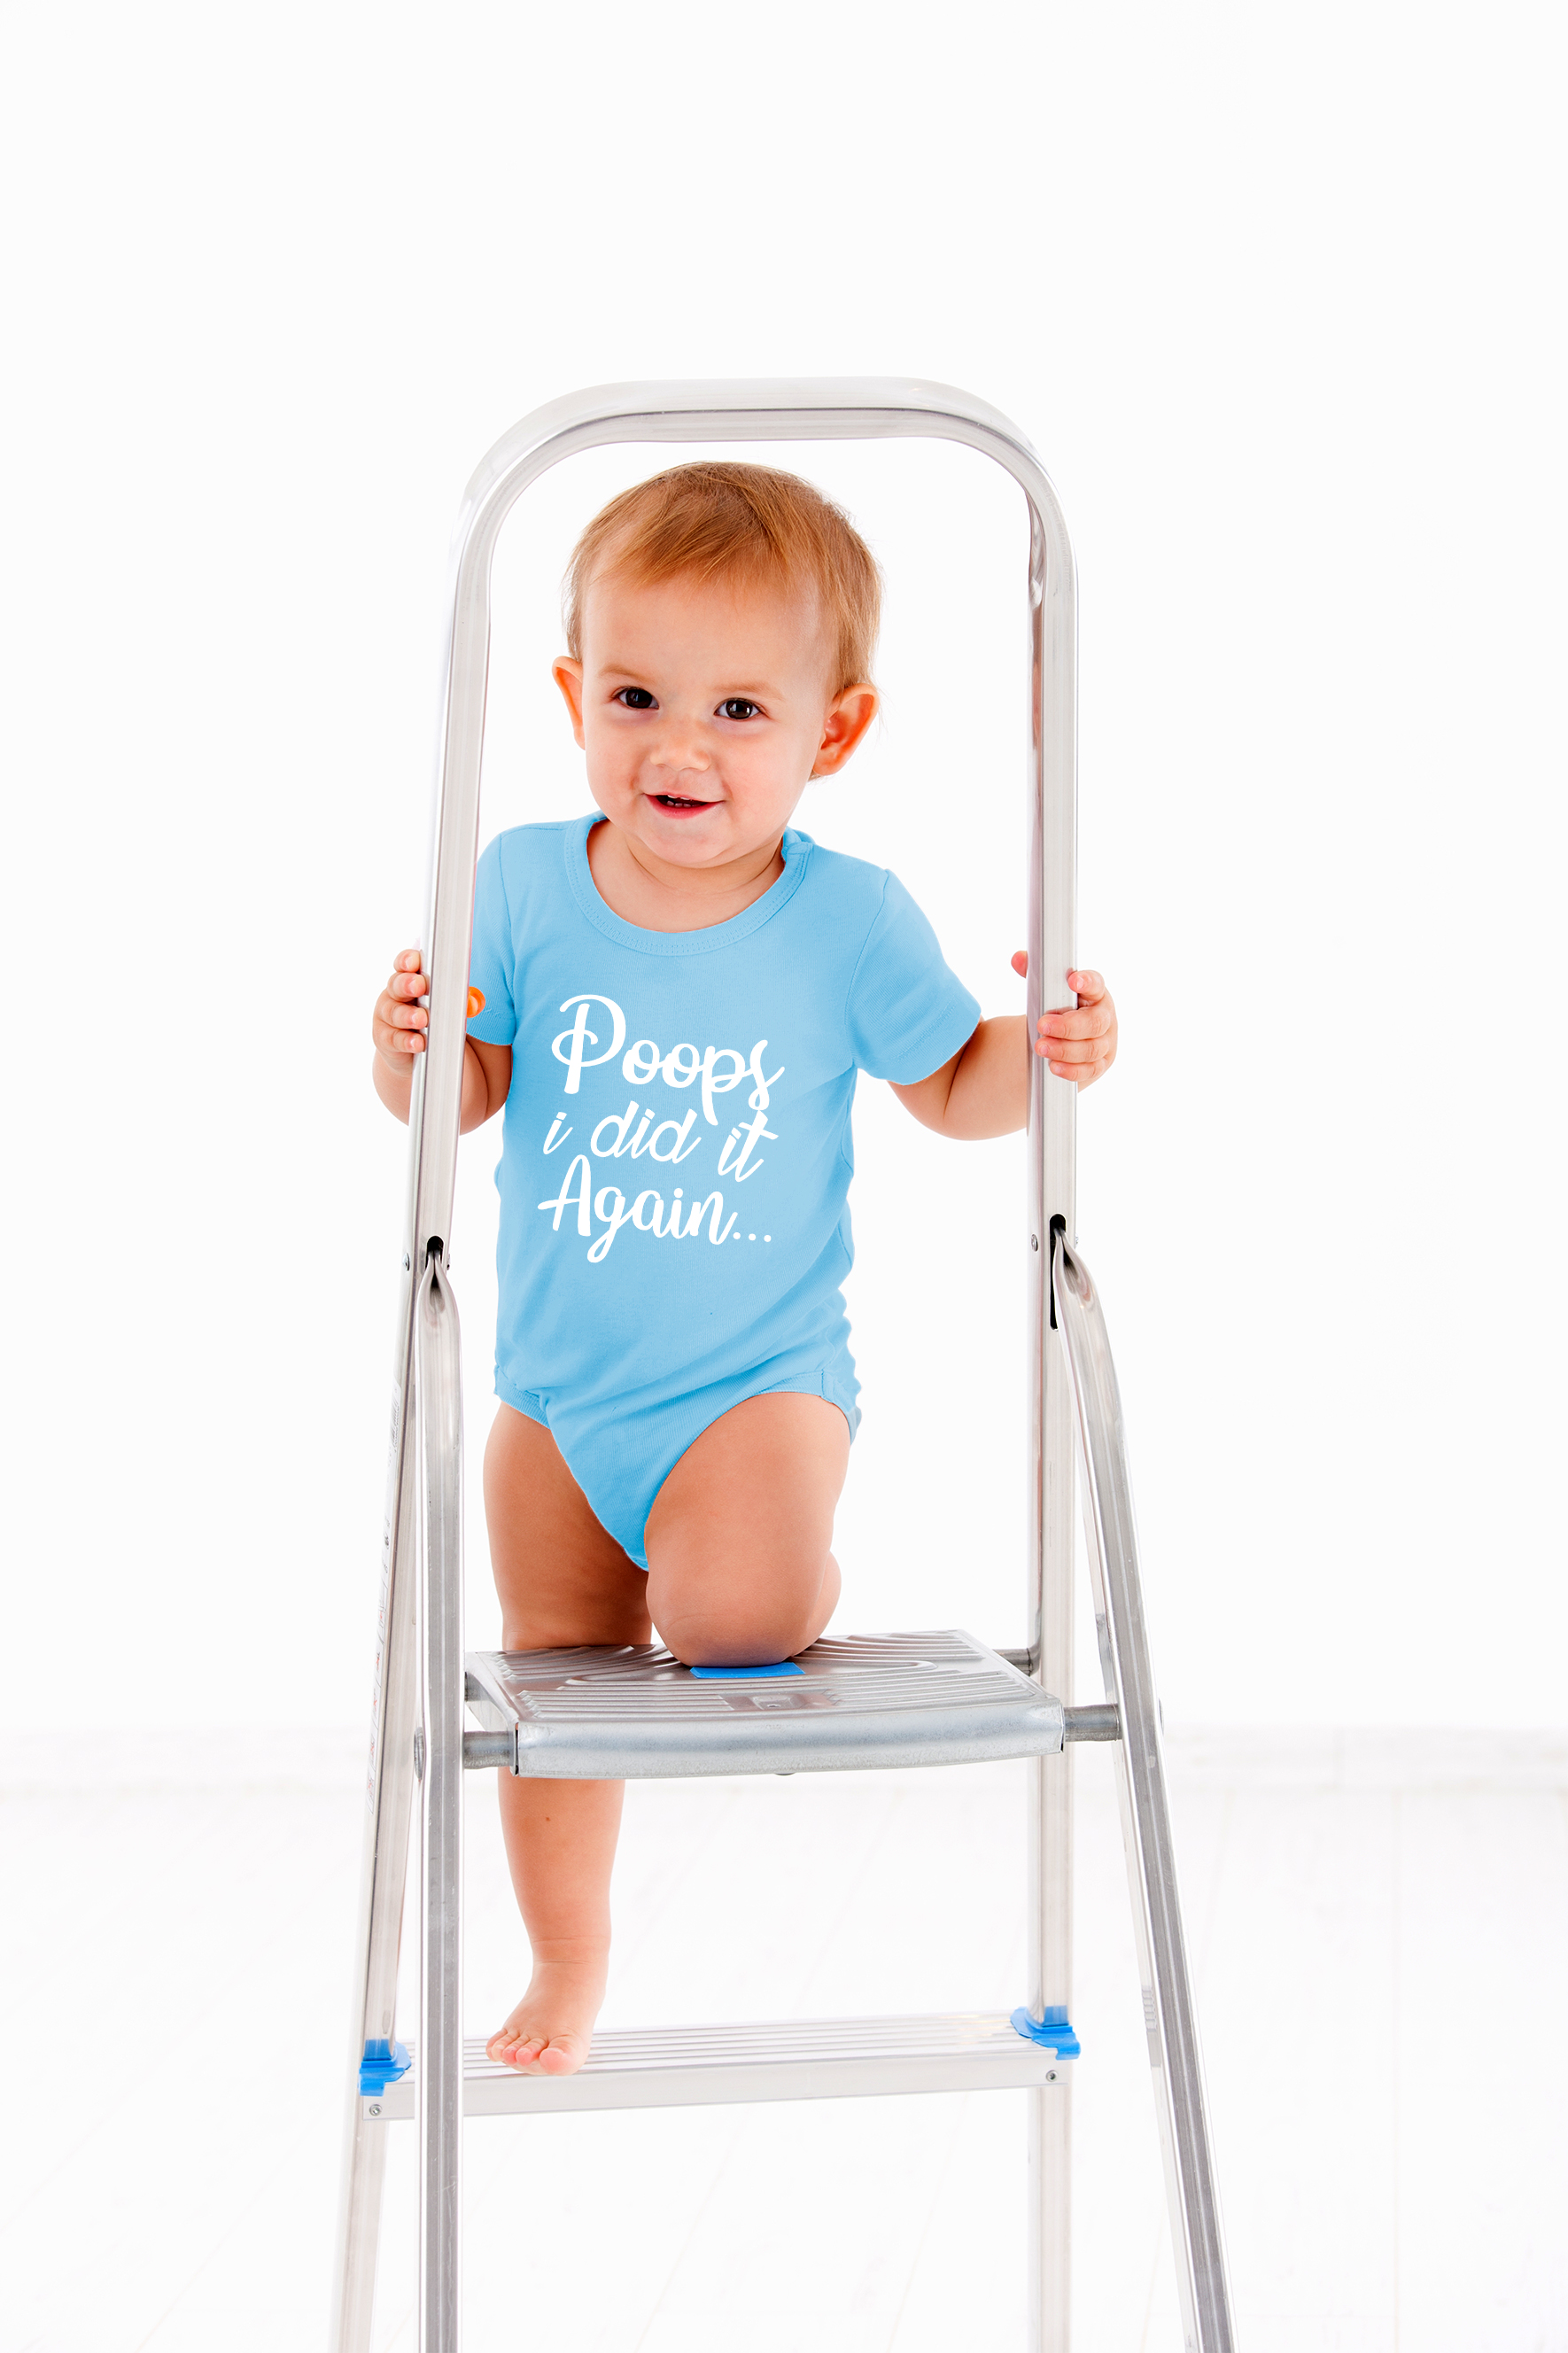 Poops, I Did It Again - Funny Parody Song, Oh Baby, Baby - Cute One-Piece Infant Baby Bodysuit - image 3 of 4